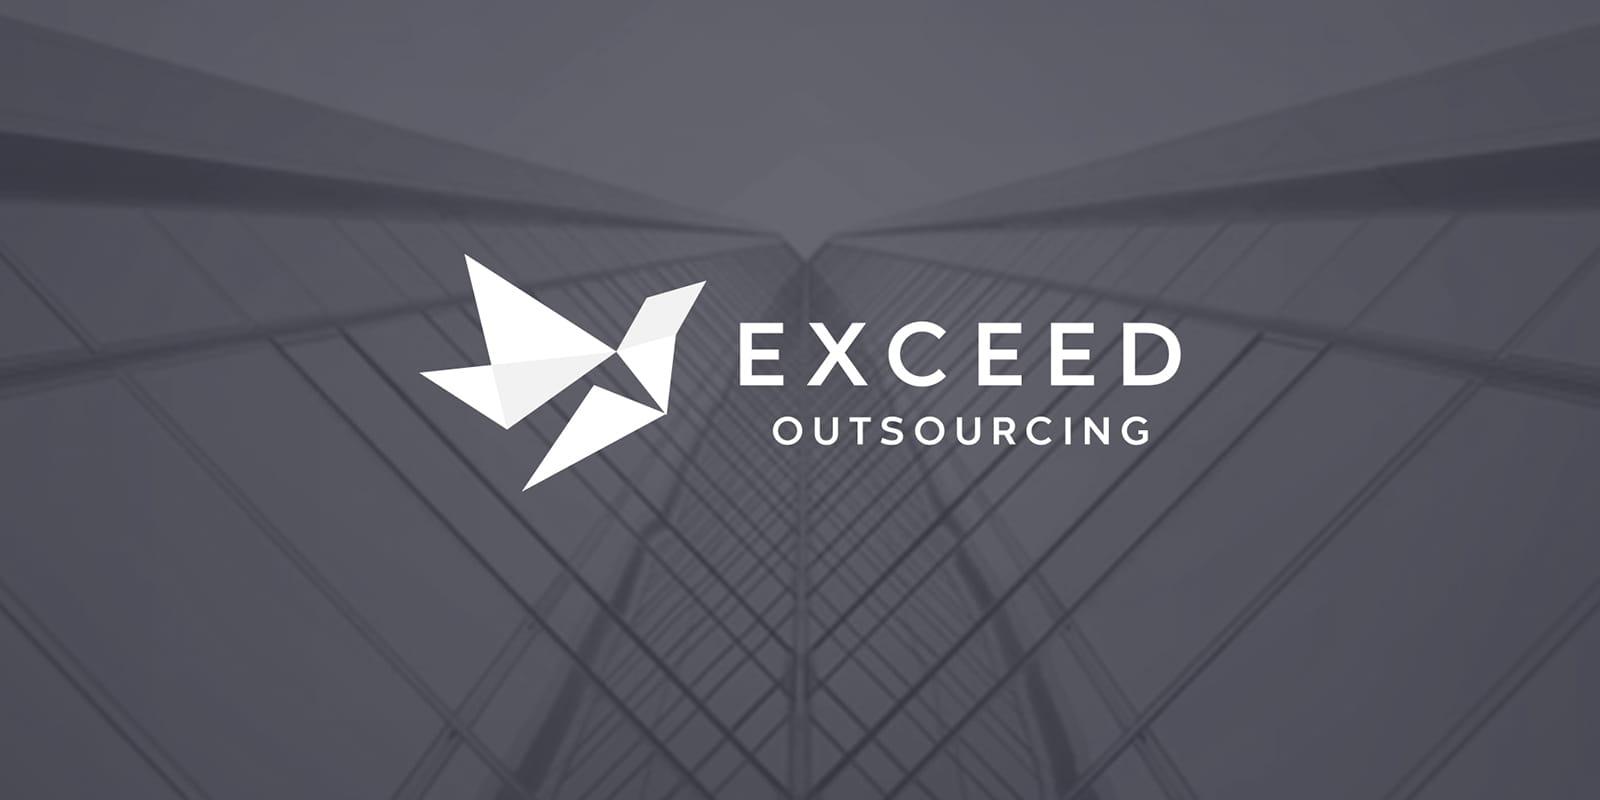 Our Story - Exceed Outsourcing